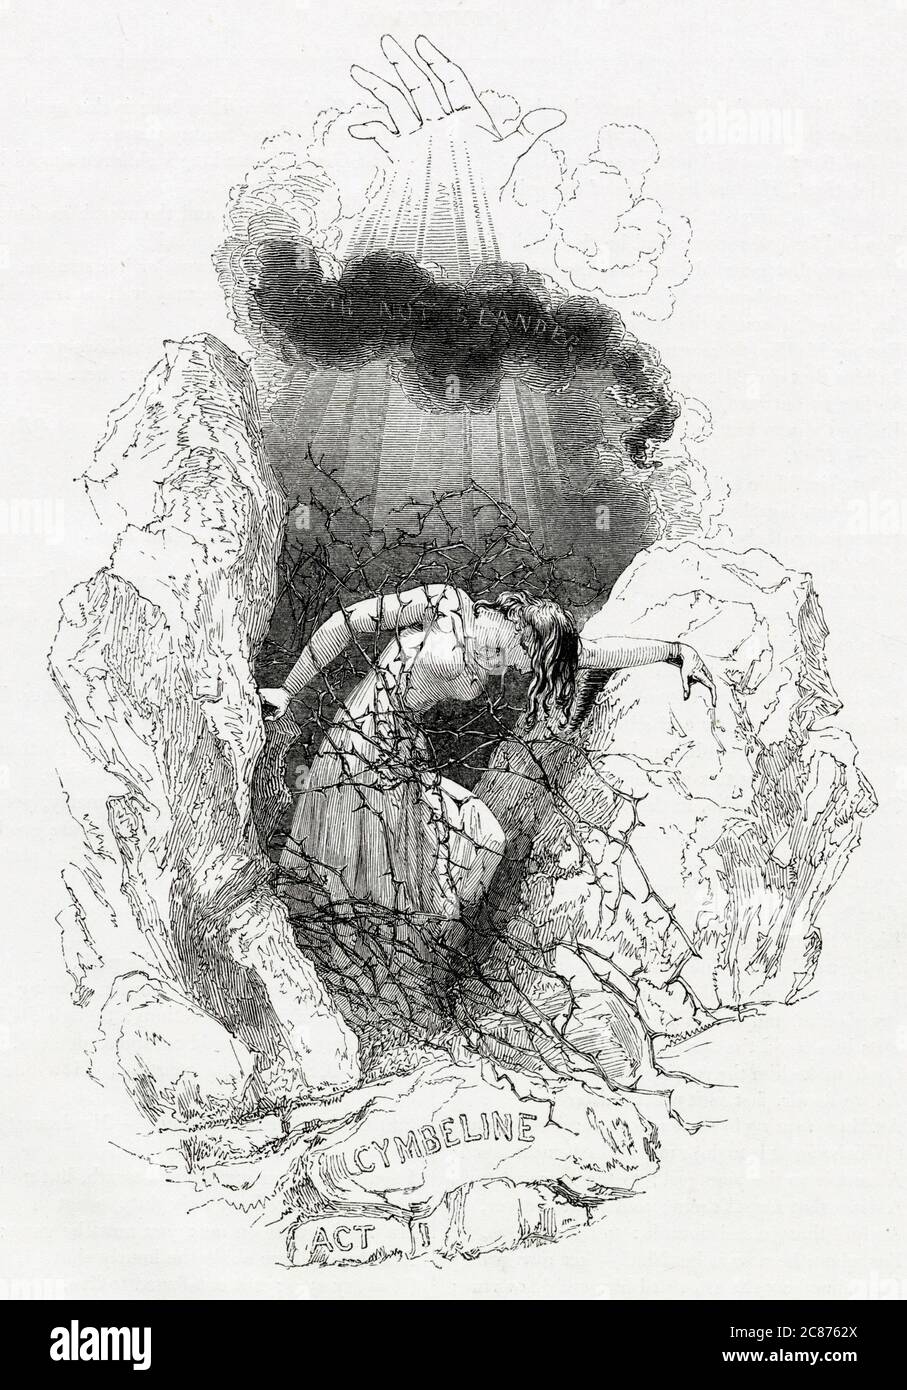 Illustration by Kenny Meadows to Cymbeline, by William Shakespeare. Introductory illustration to Act I, showing Imogen struggling through thorny branches.      Date: 1840 Stock Photo